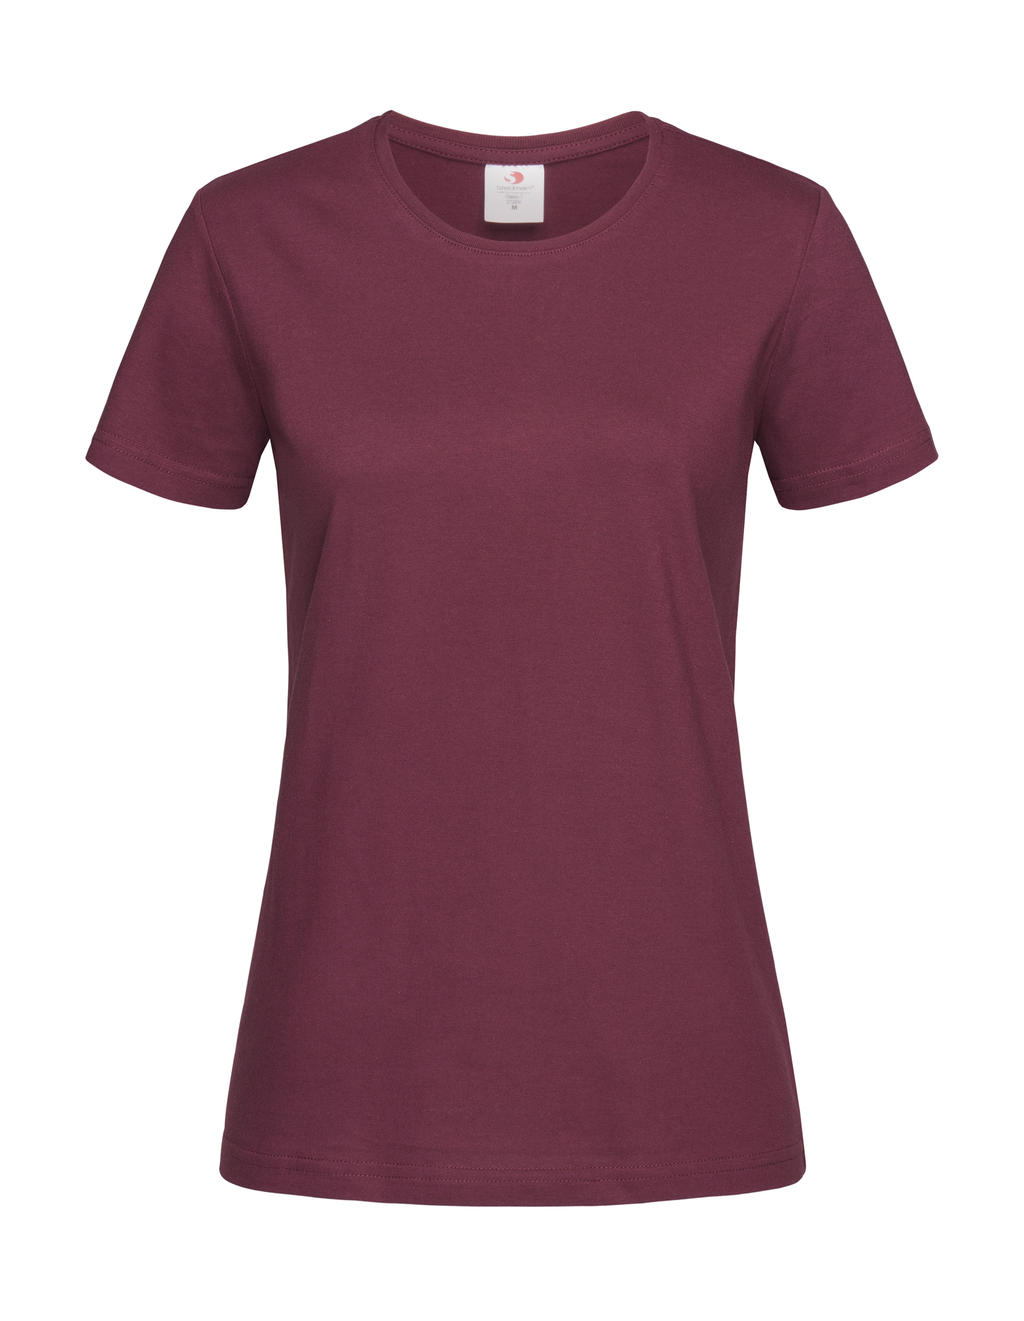 Classic-T Fitted Women - burgundy red